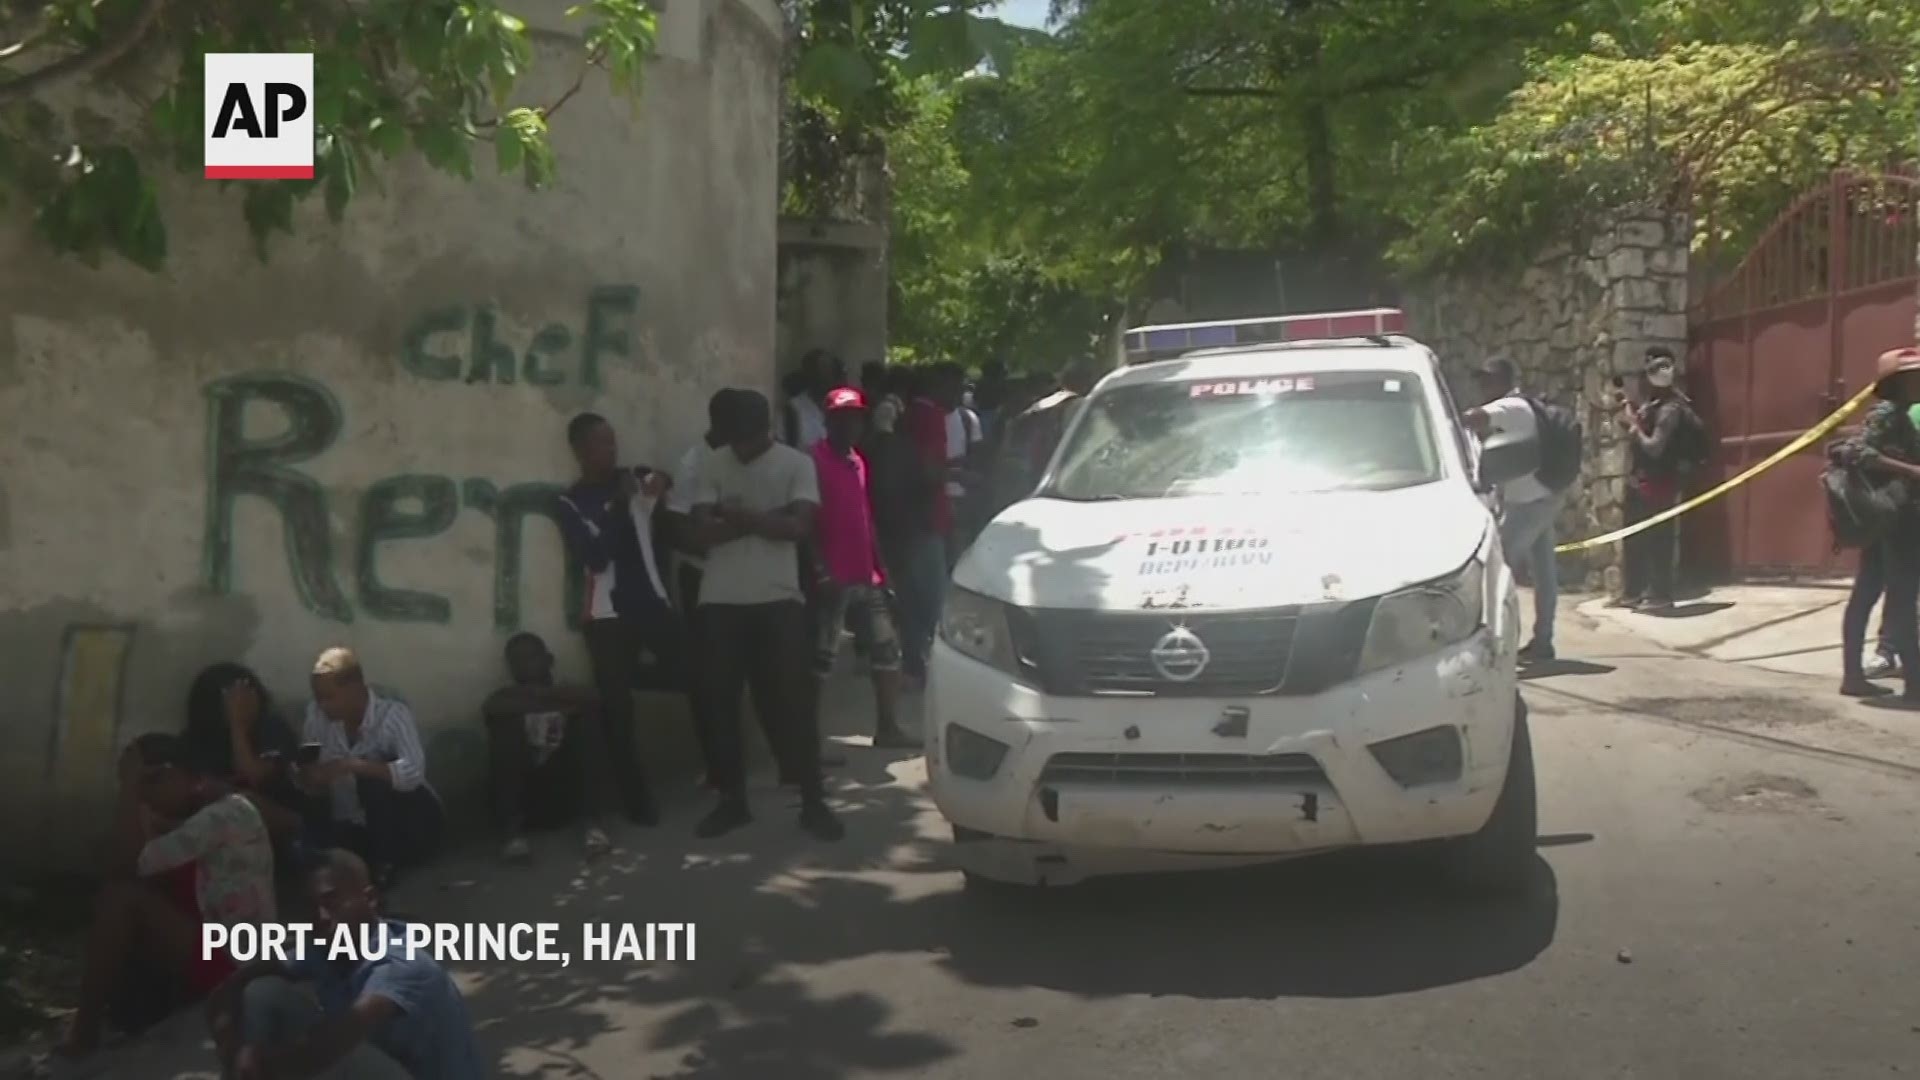 Police investigators in Haiti were combing the home of assassinated president Jovenel Moïse on Wednesday, hours after he was killed by unidentified gunmen.